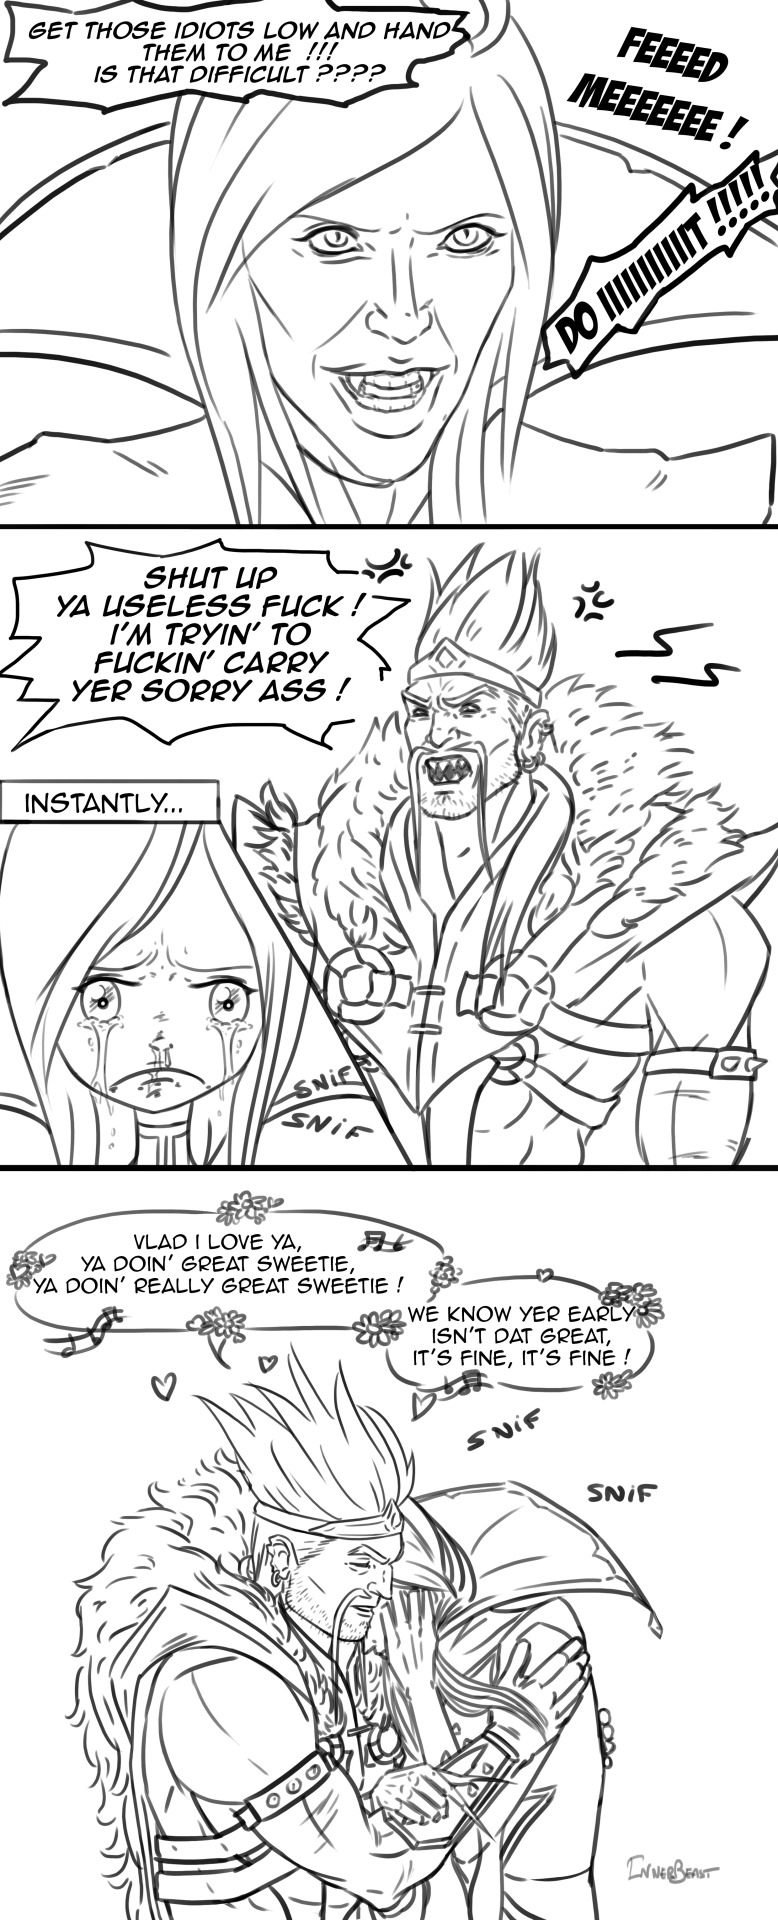 Something about getting carried by your ADC... #League of Legends  #LoL League of Legends #draven #draven league of legends #draven lol #vladimir league of legends  #draven x vladimir #dravimir #league of fanart  #league of legends fanart #lol fanart #league of legends art #lol art #league fan art #league art#funny#funny comics